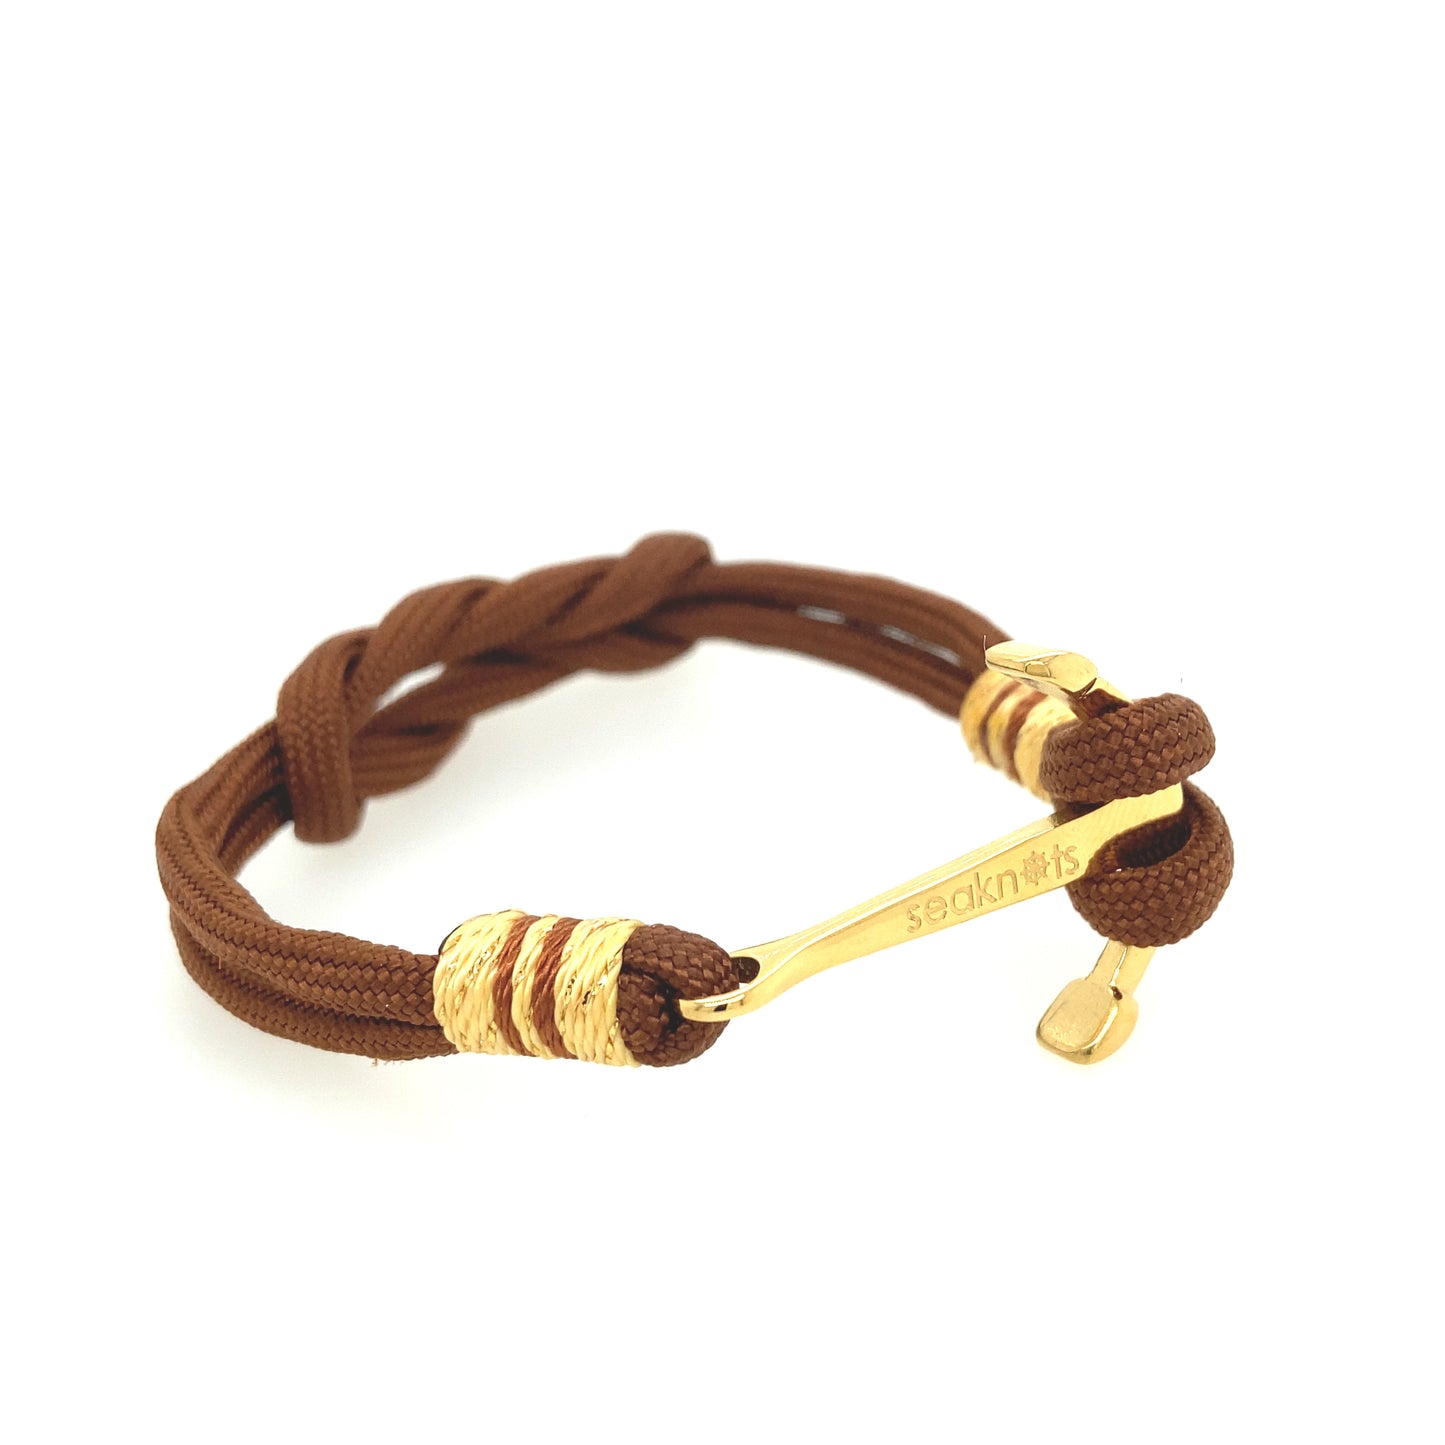 Black Double Cord with Gold Anchor Bracelet | Seaknots | Luby 